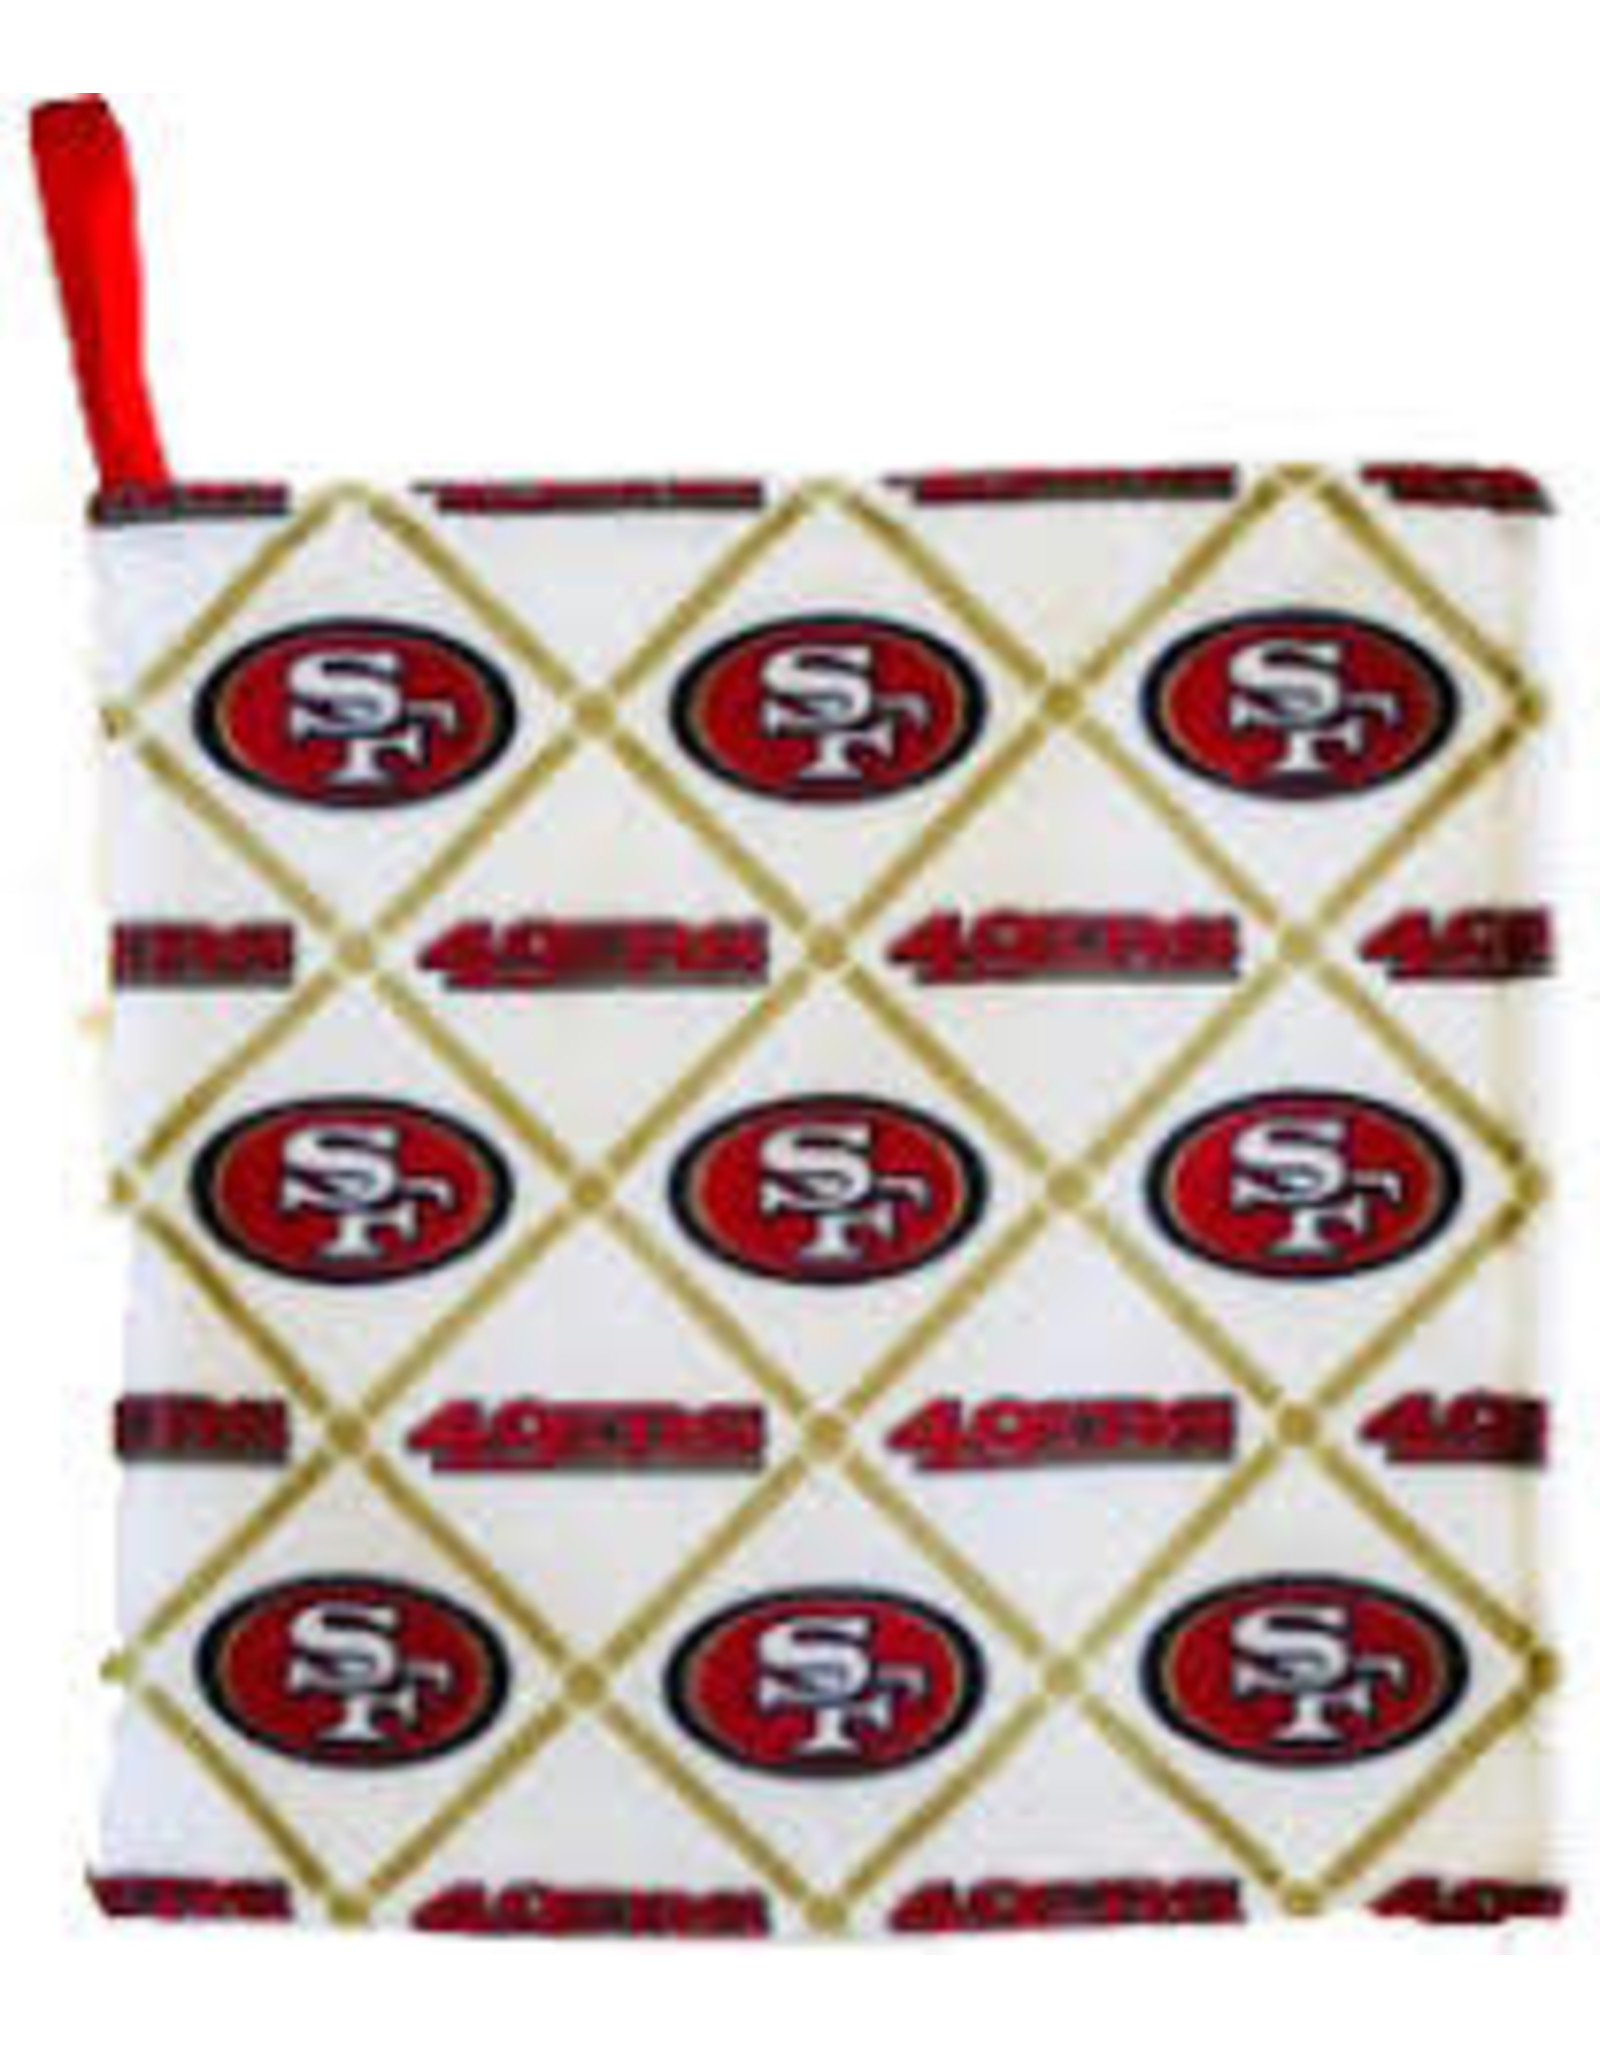 S.F. 49ers Rally Paper